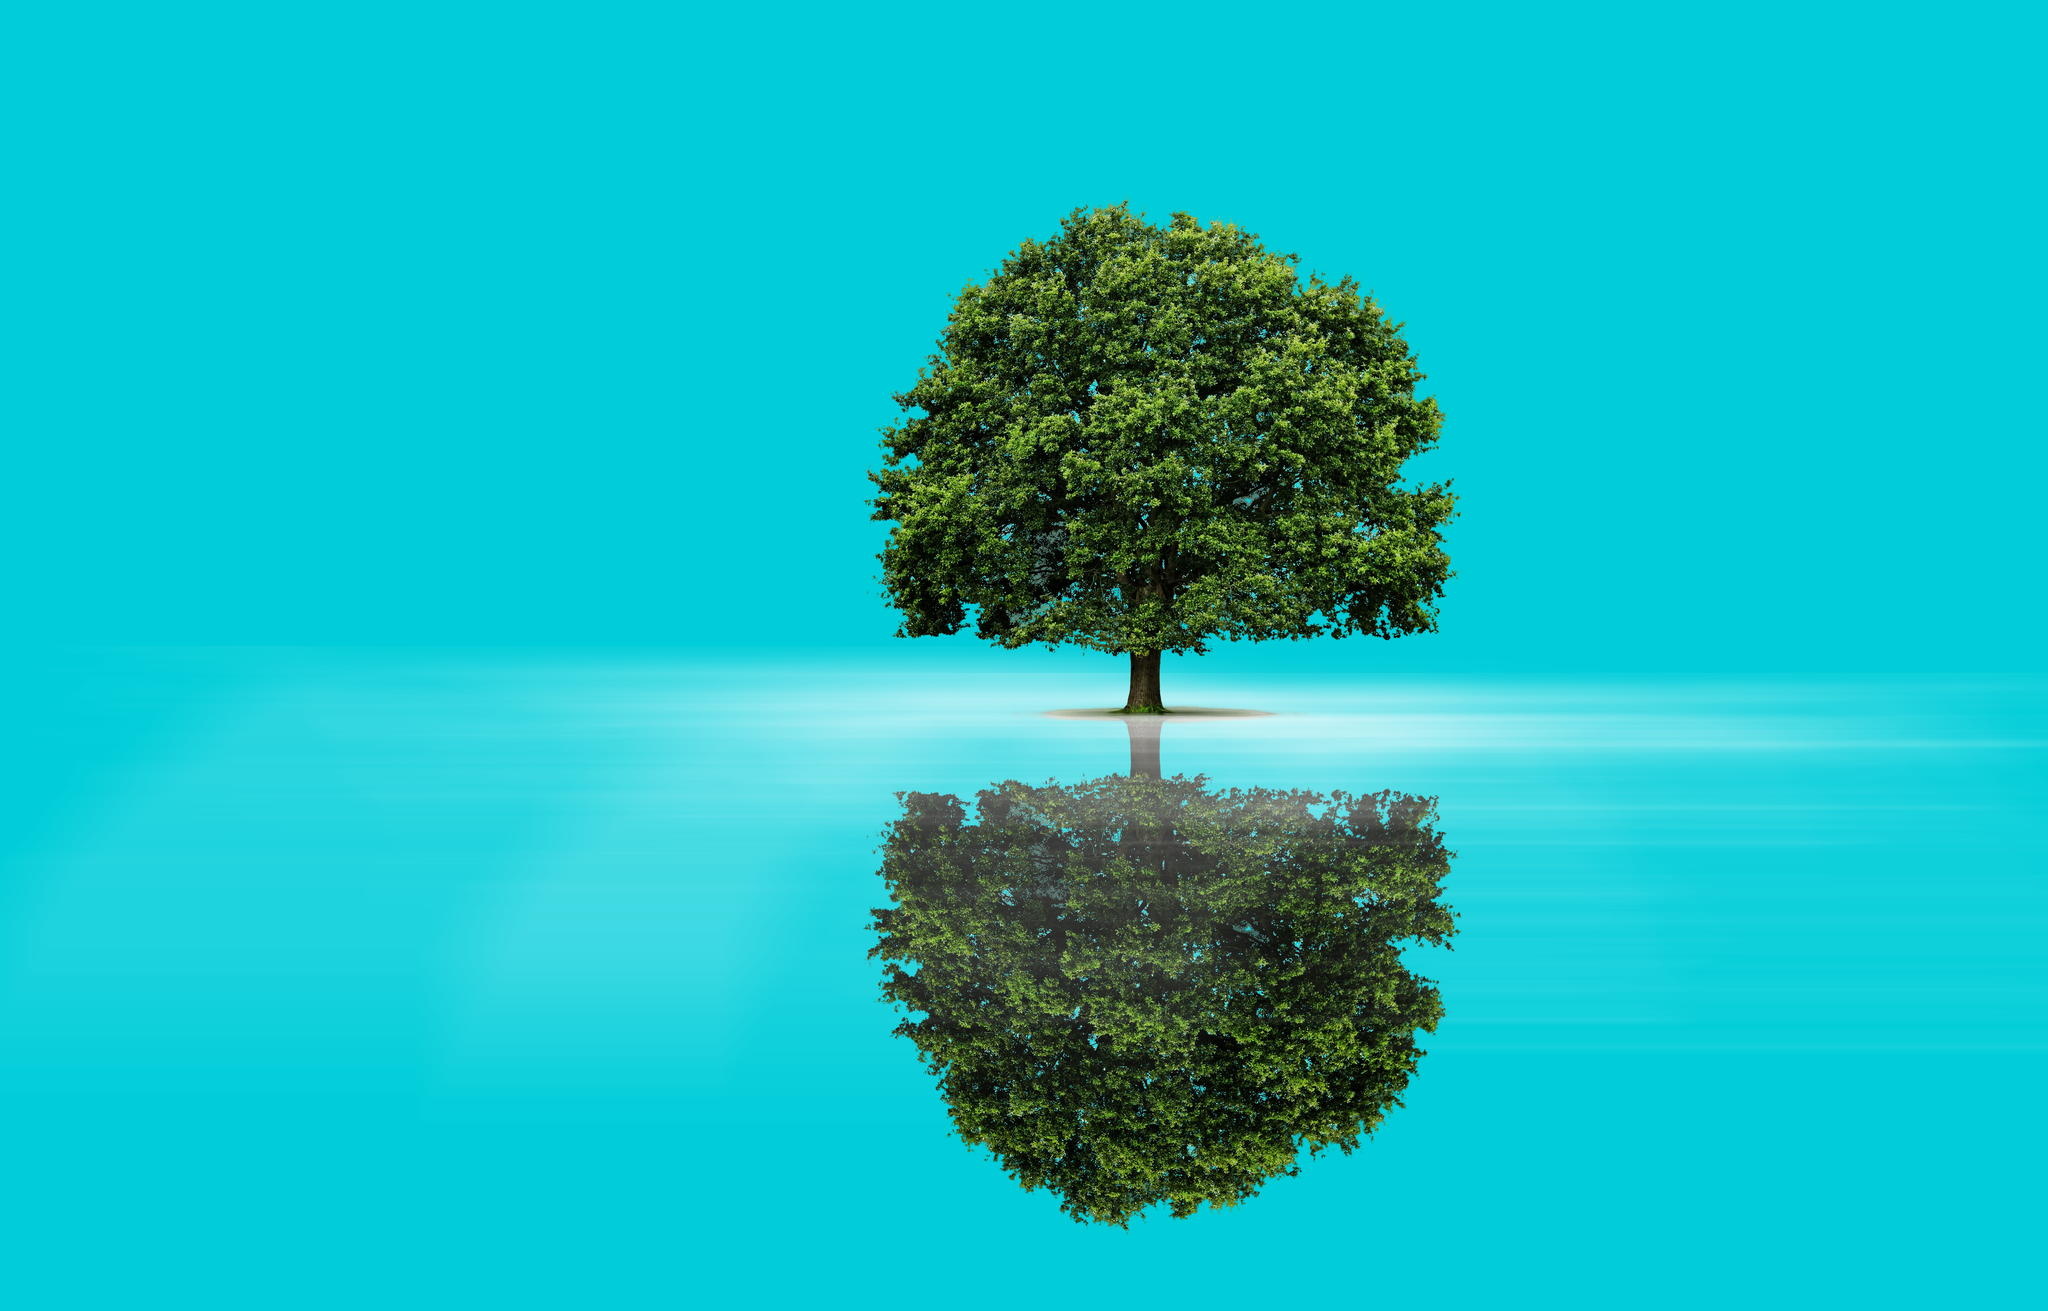 tree, reflection, background Wallpaper, HD Nature 4K Wallpapers, Images